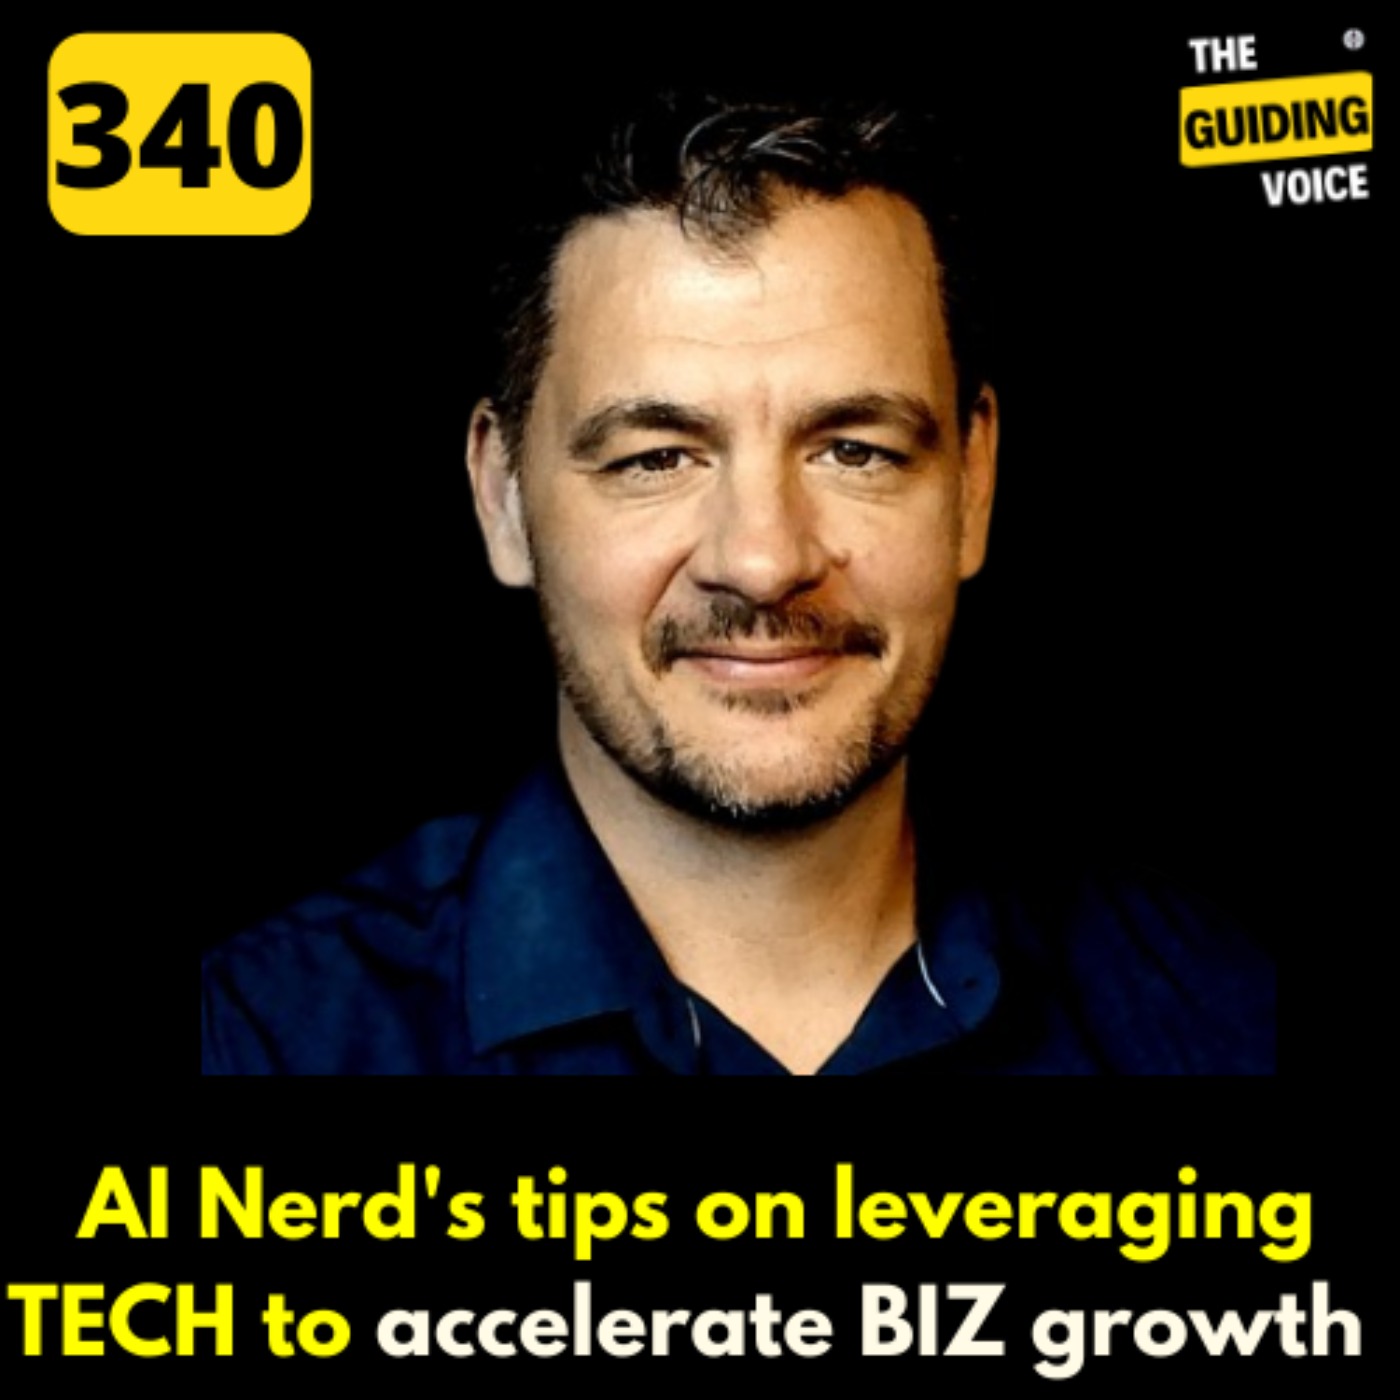 AI Nerd's tips on how to leverage technology to accelerate business growth | Thomas Helfrich | TGV340